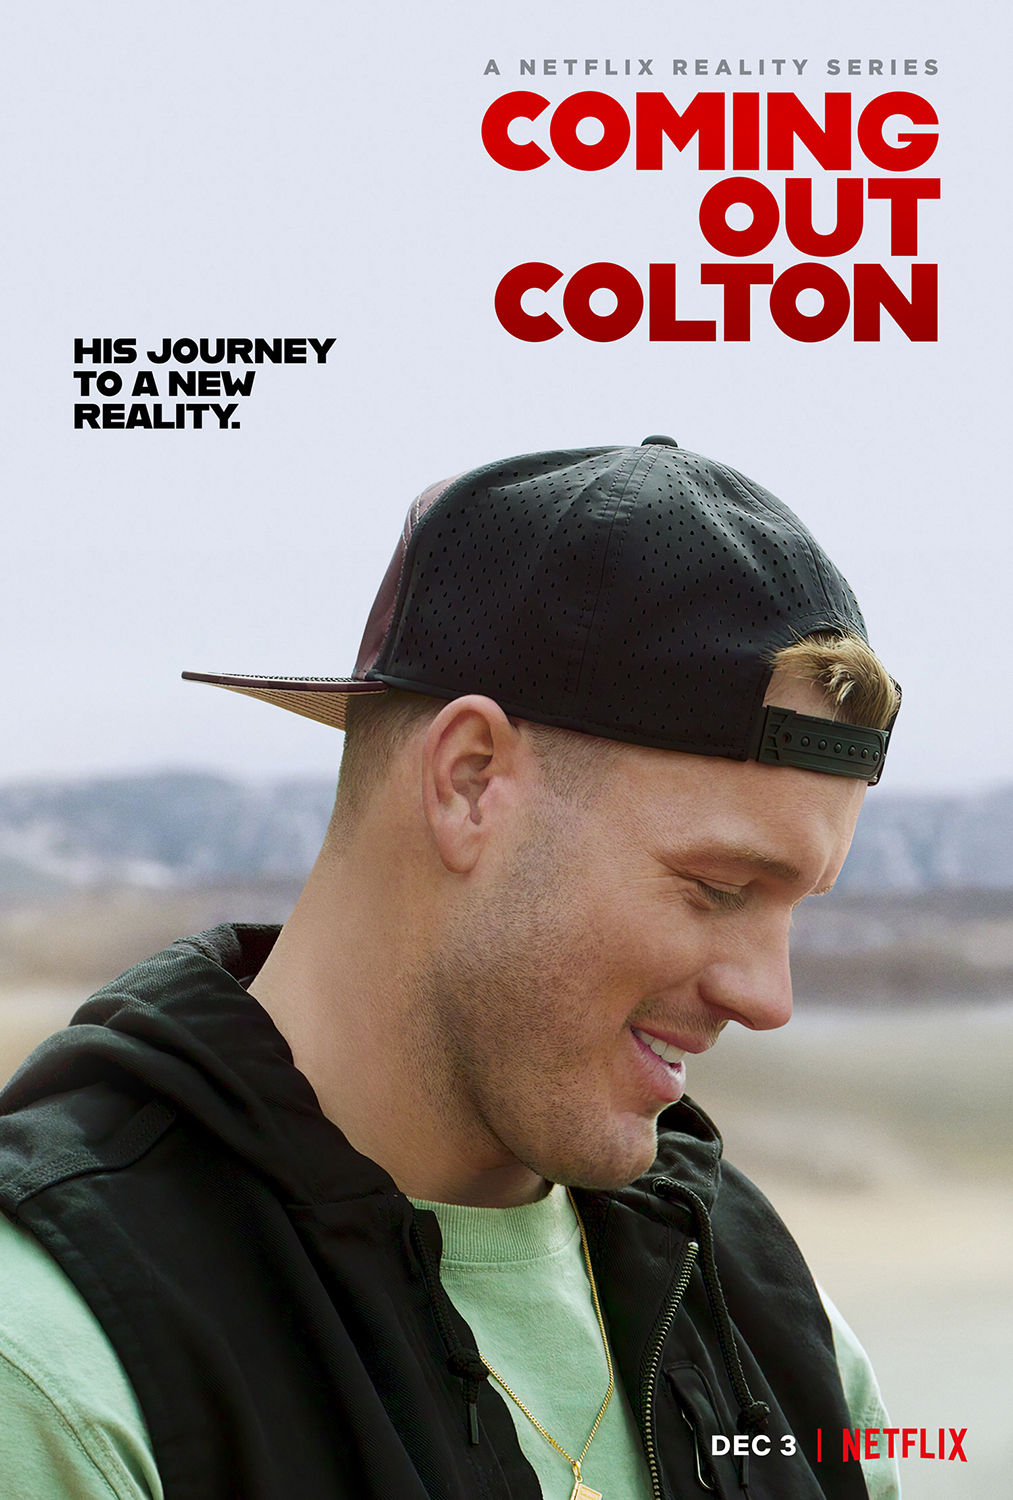 Netflix series "Coming Out Colton" released in the United States earlier this month, featuring former NFL tight-end and 'bachelor' Colton Underwood. Courtesy of Netflix